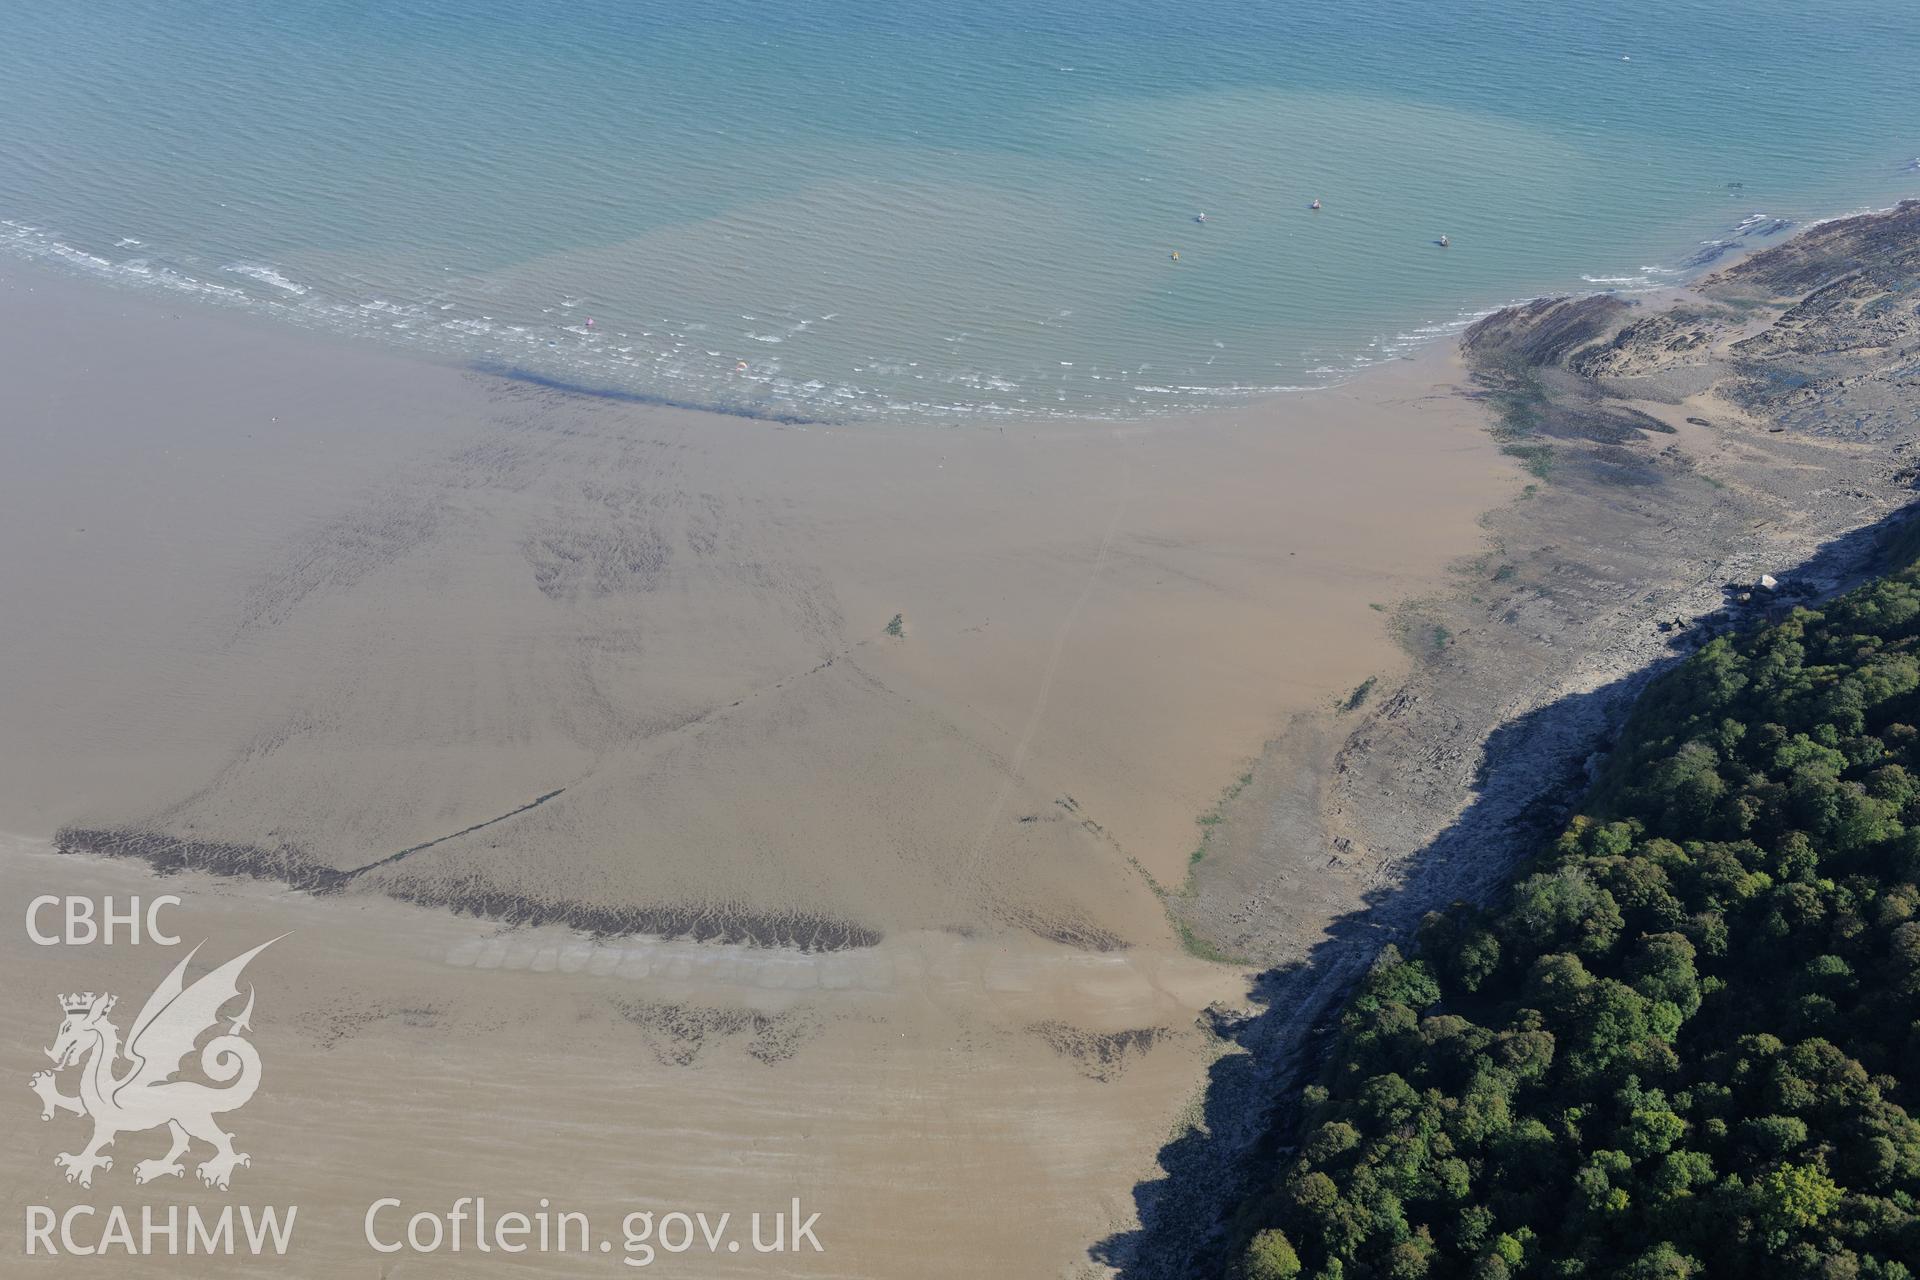 Oxwich Bay fish trap, on the southerns shores of the Gower Peninsula. Oblique aerial photograph taken during the Royal Commission's programme of archaeological aerial reconnaissance by Toby Driver on 30th September 2015.